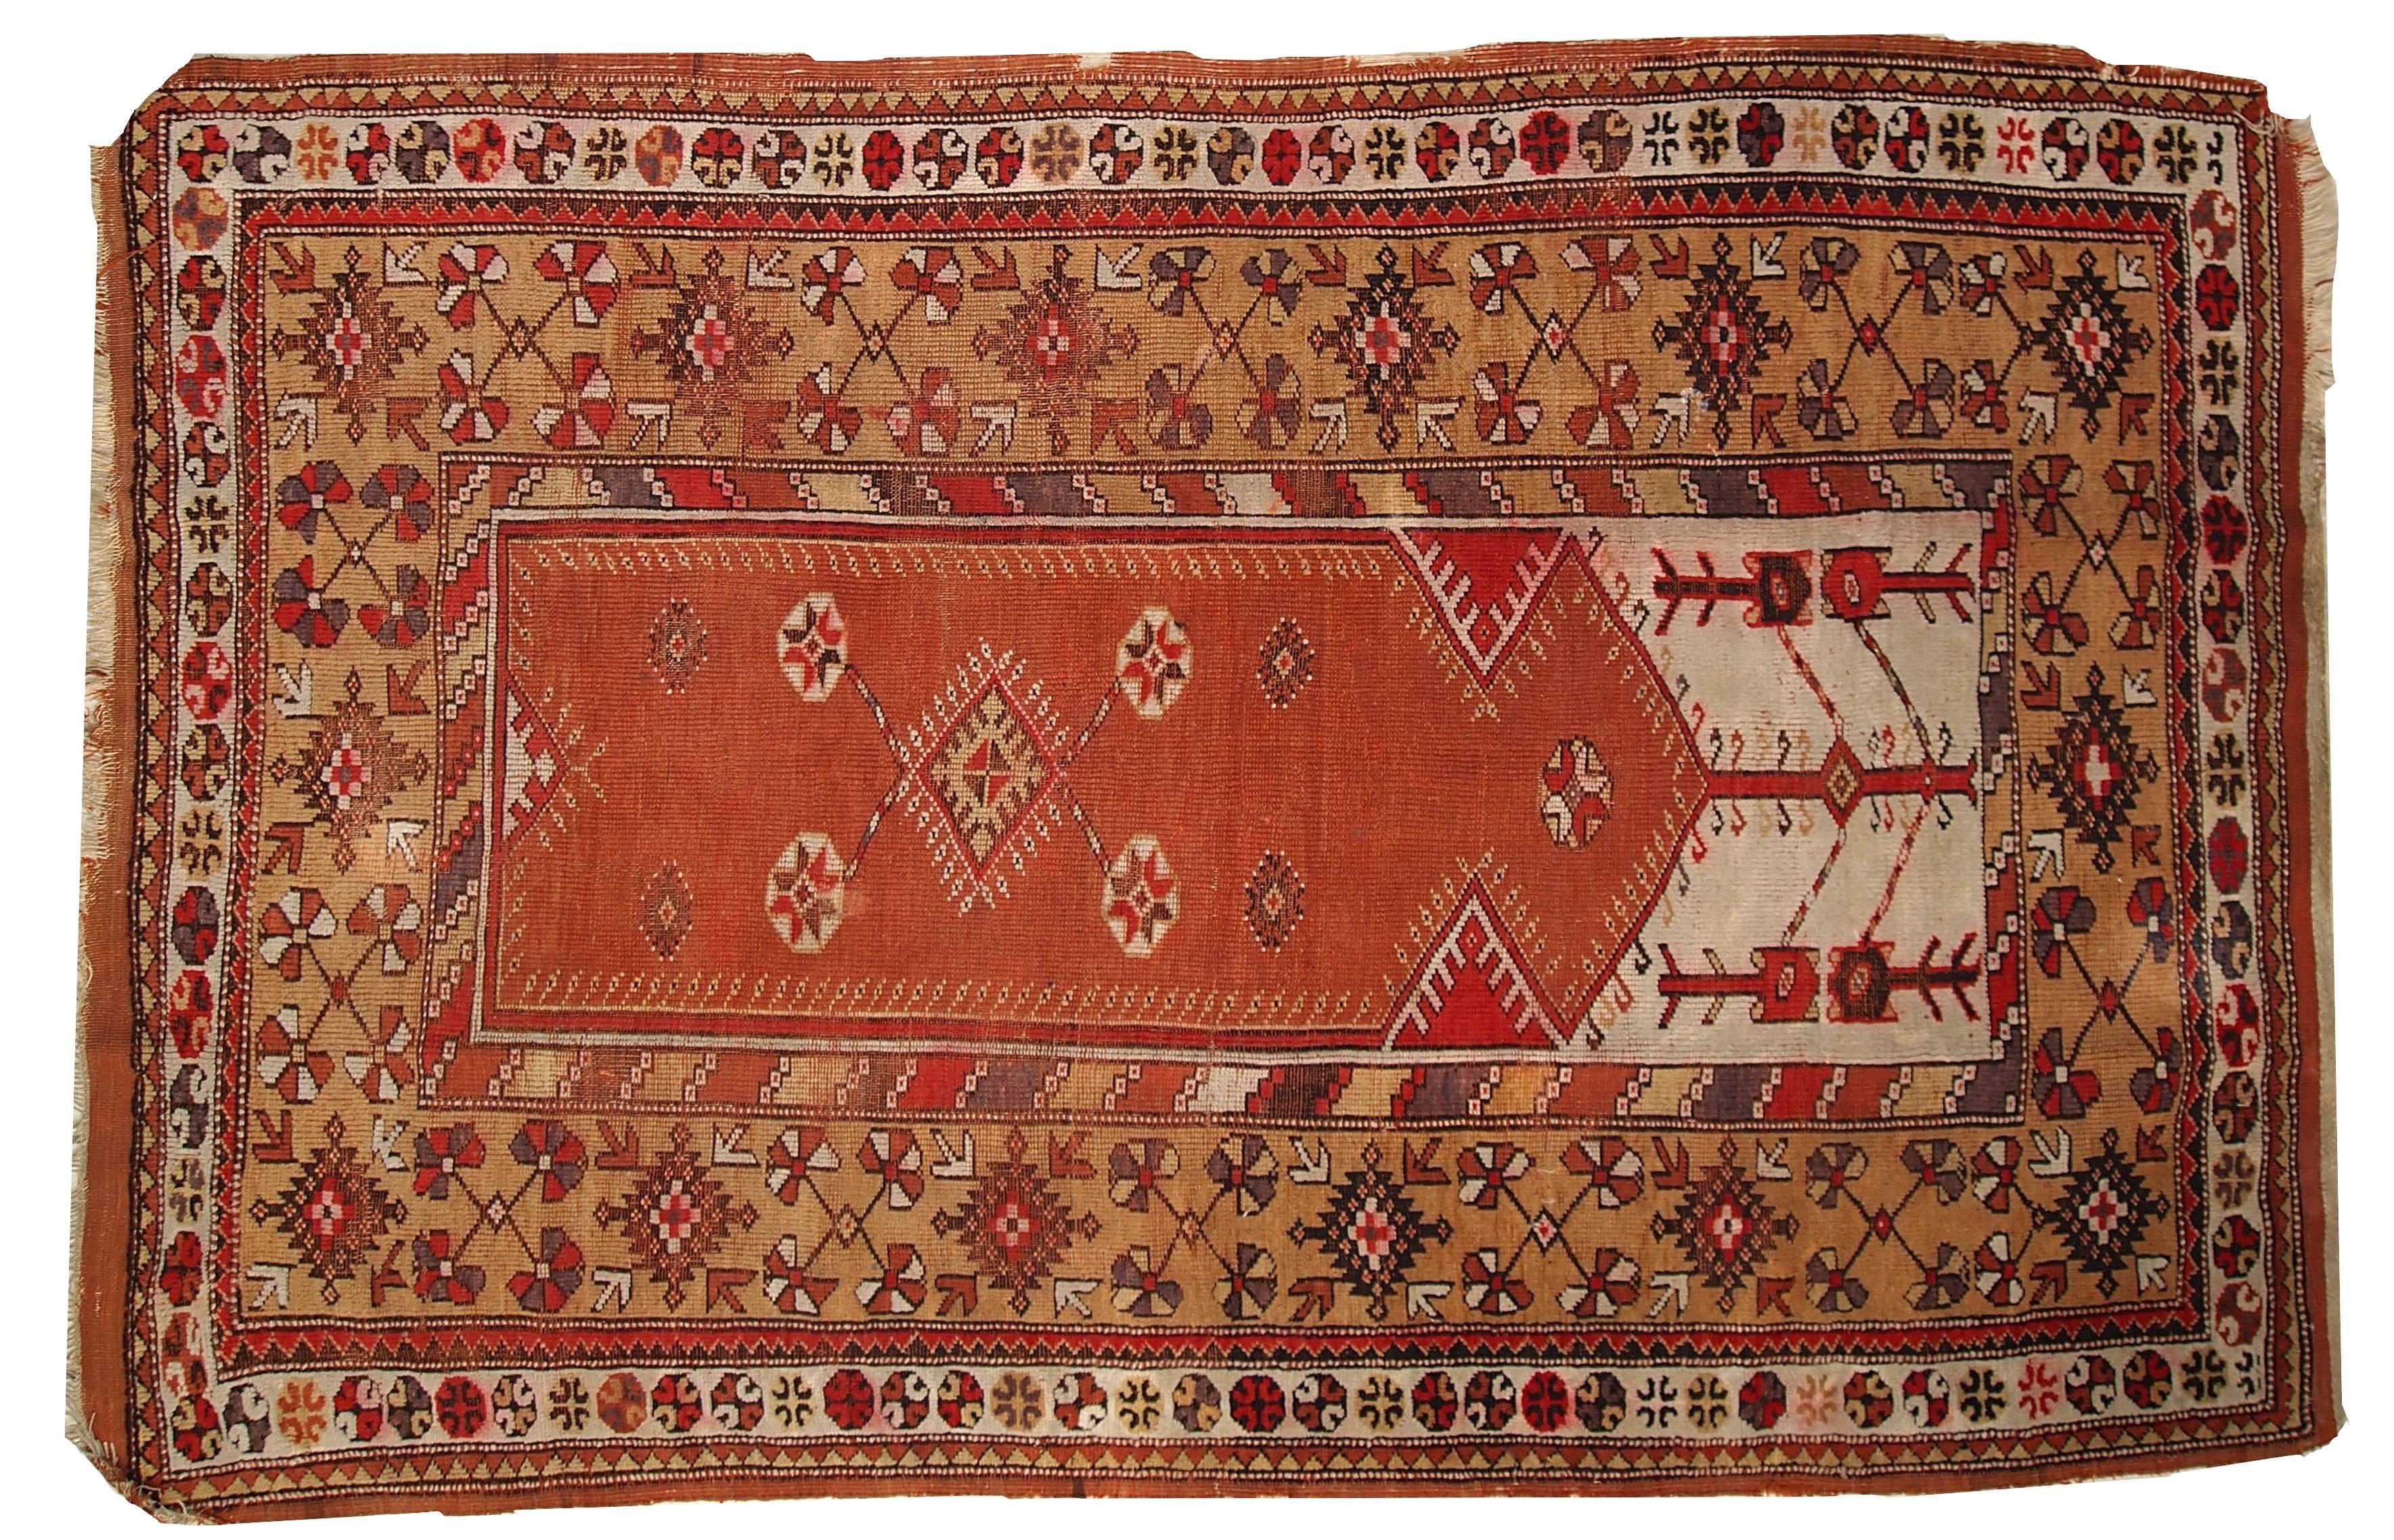 Handmade antique Turkish Melas rug from the beginning of 20th century. The rug is made in traditional Melas praying style in regular for it colors: red, white and yellow. It has beautiful large border surrounding central praying area. The condition